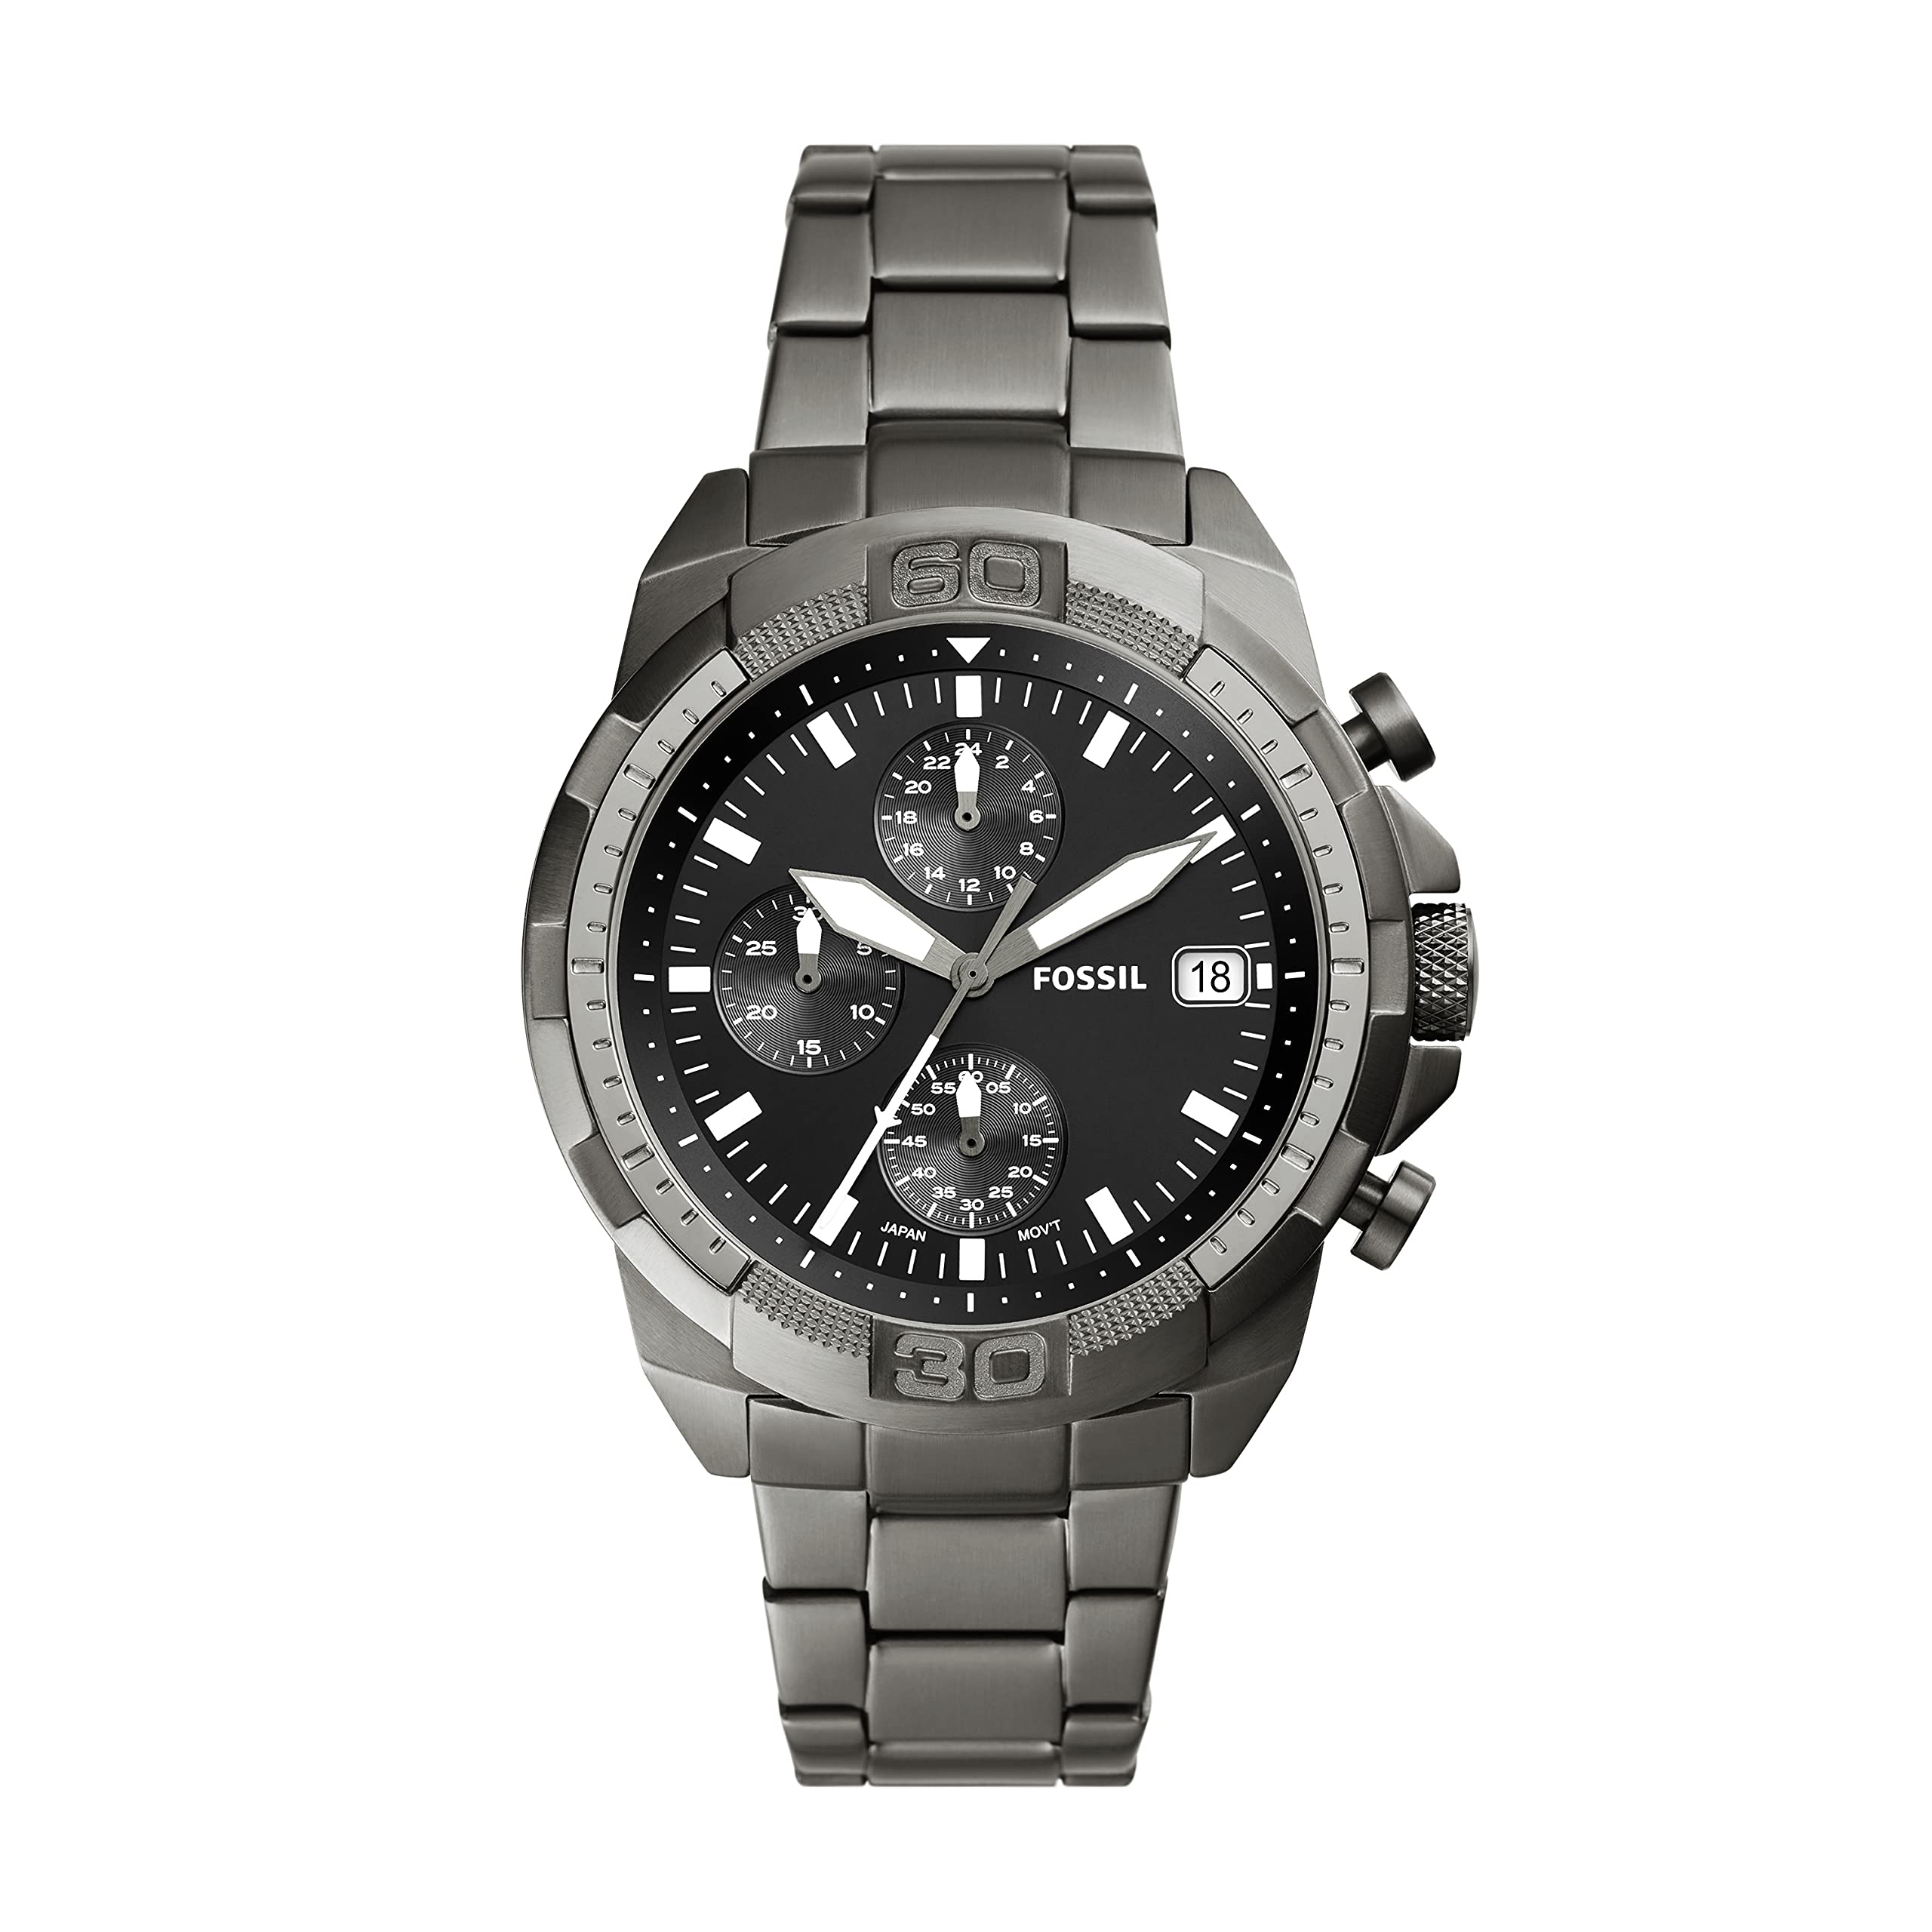 Fossil Bronson Men's Watch with Stainless Steel Bracelet or Genuine Leather Band, Chronograph or Three-Hand Analog Display